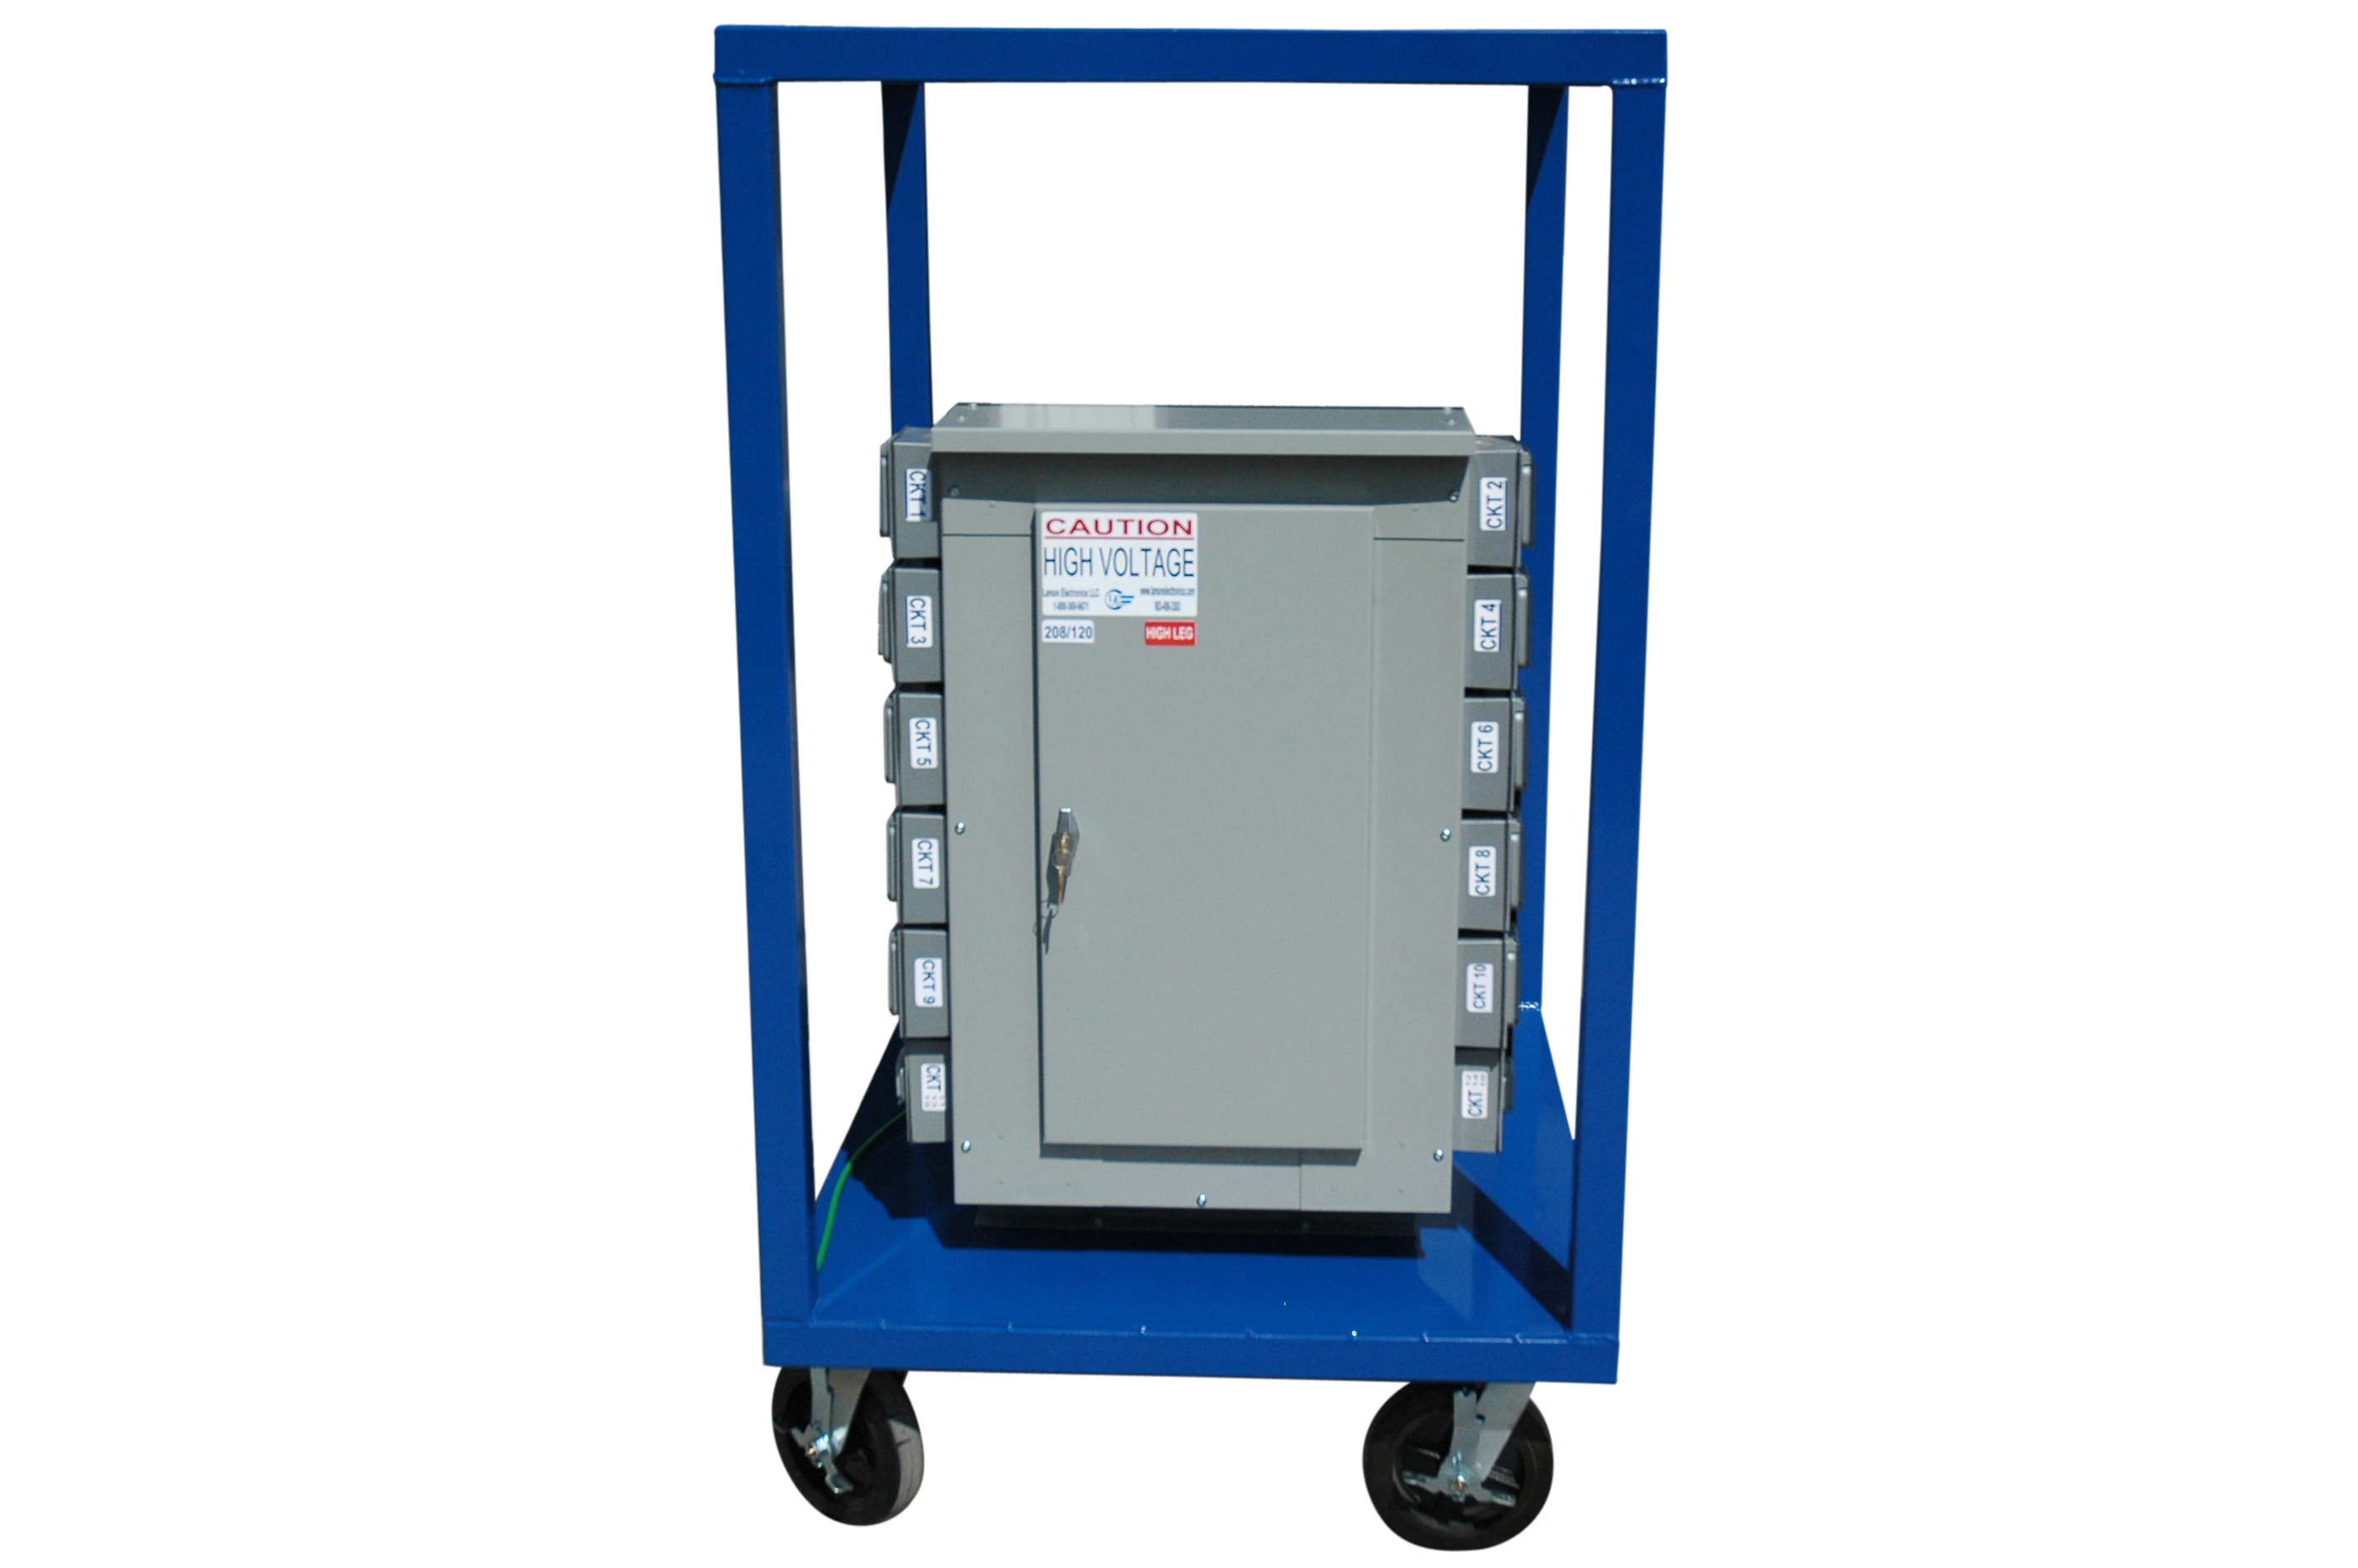 Portable Temporary Distribution Panel that steps up 208Y to 480V